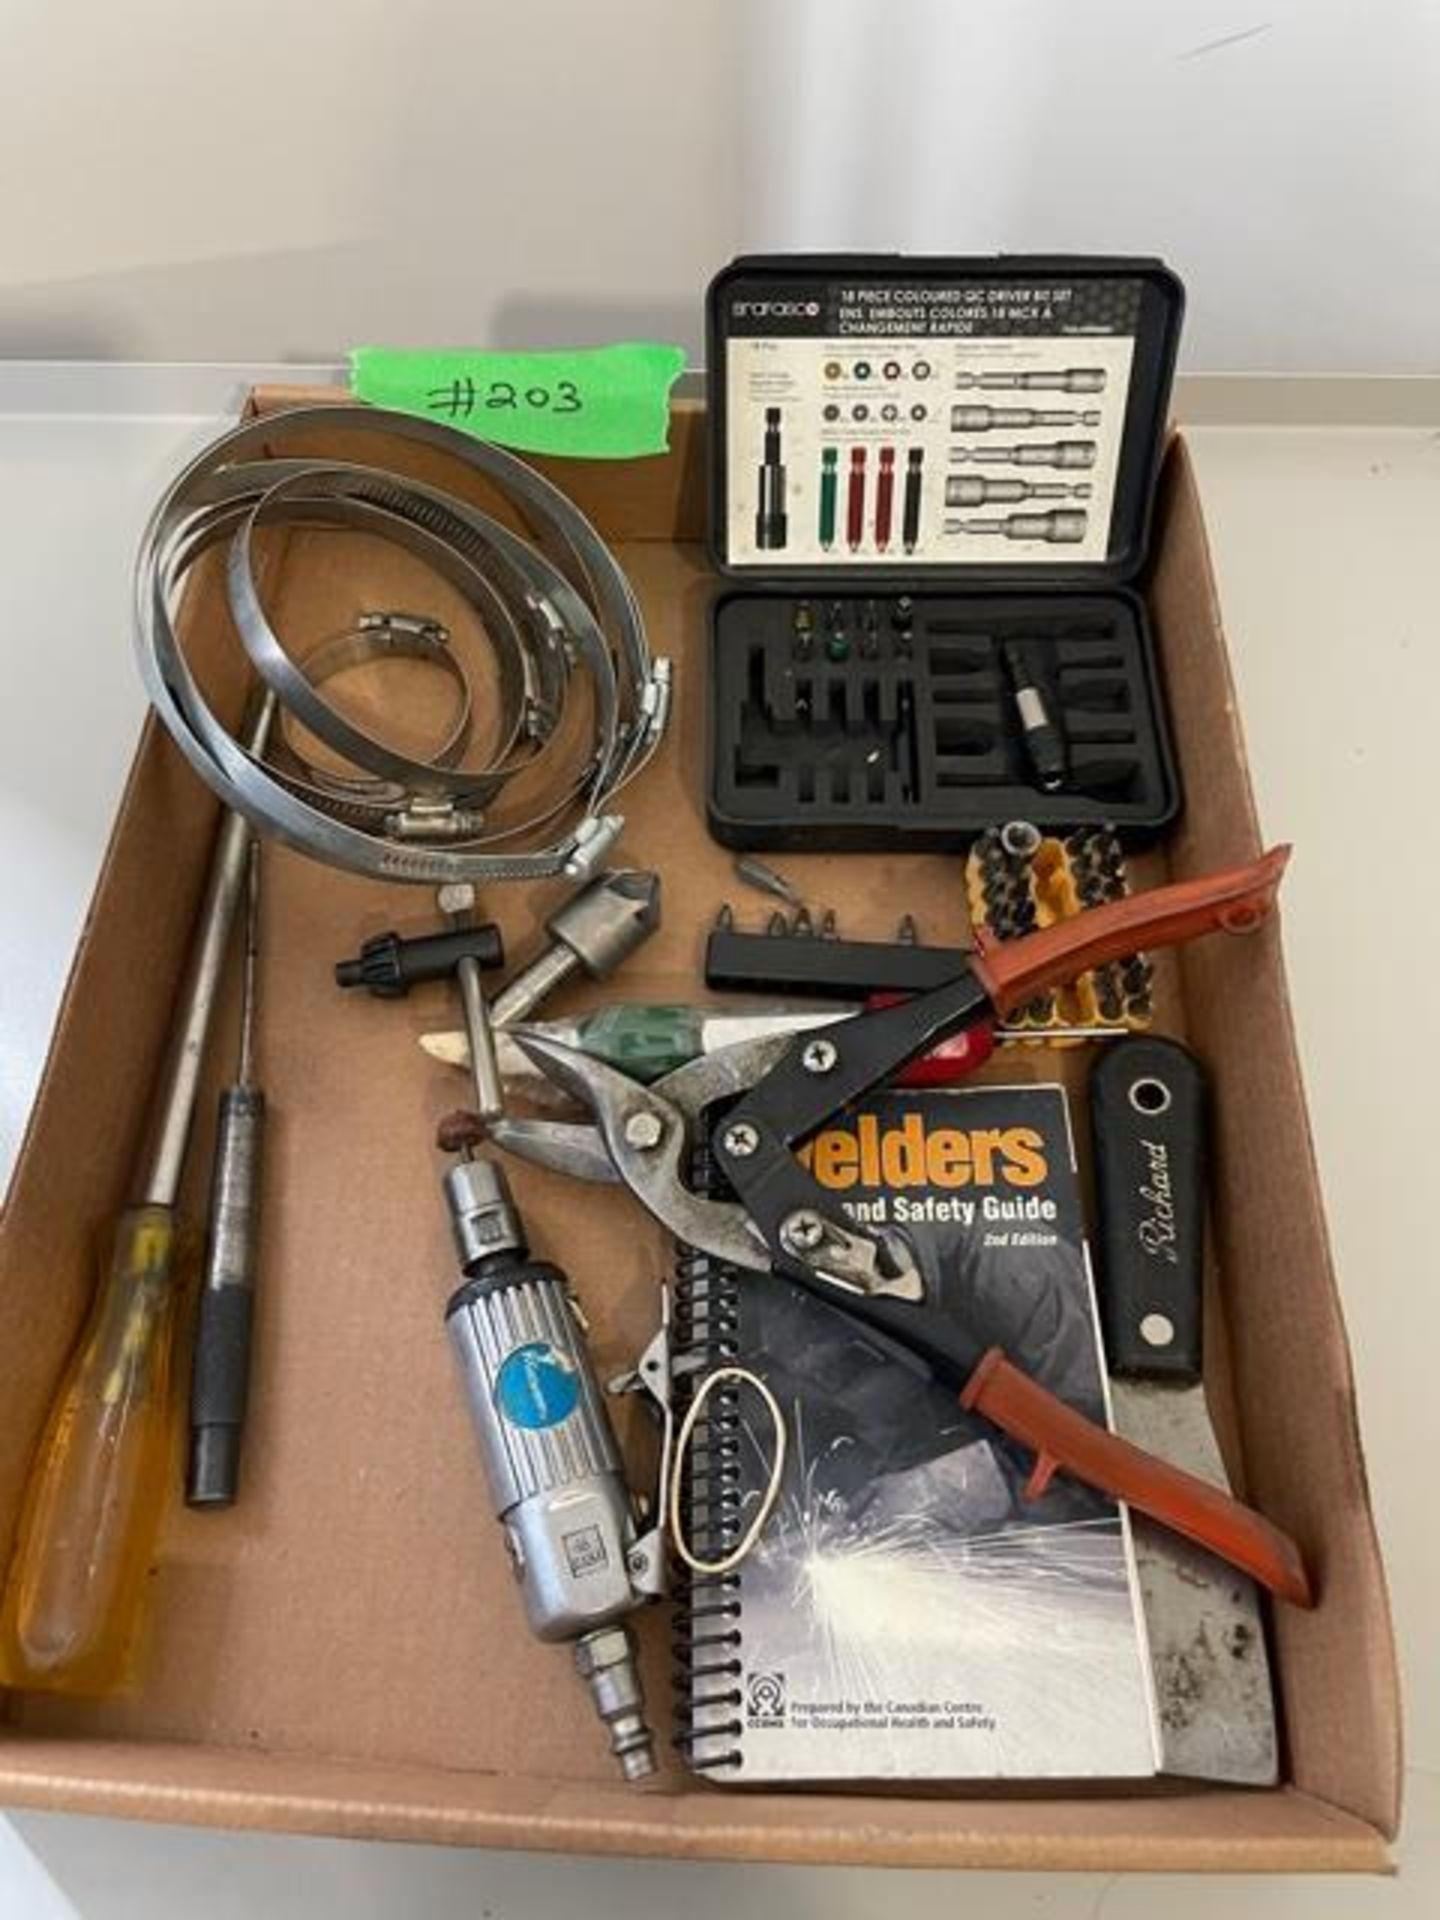 Welder's book, deburr tool, Rings and shop accessories